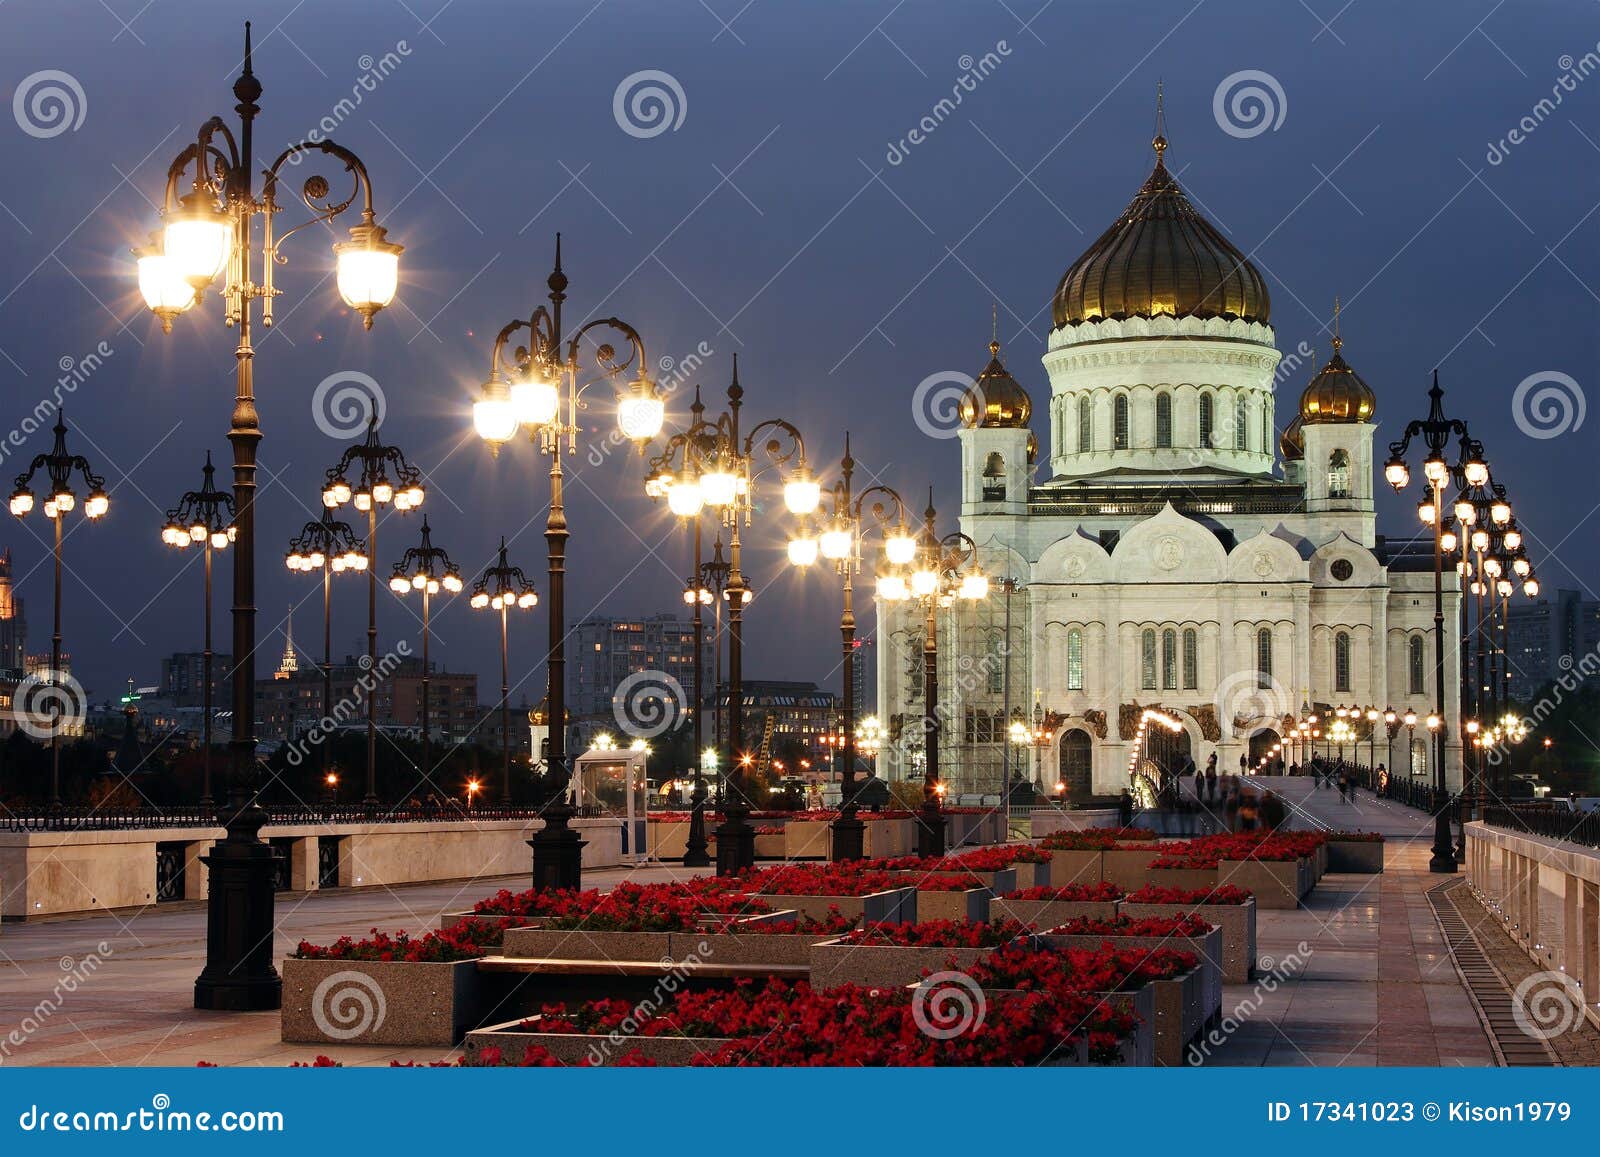 cathedral of christ the savior.